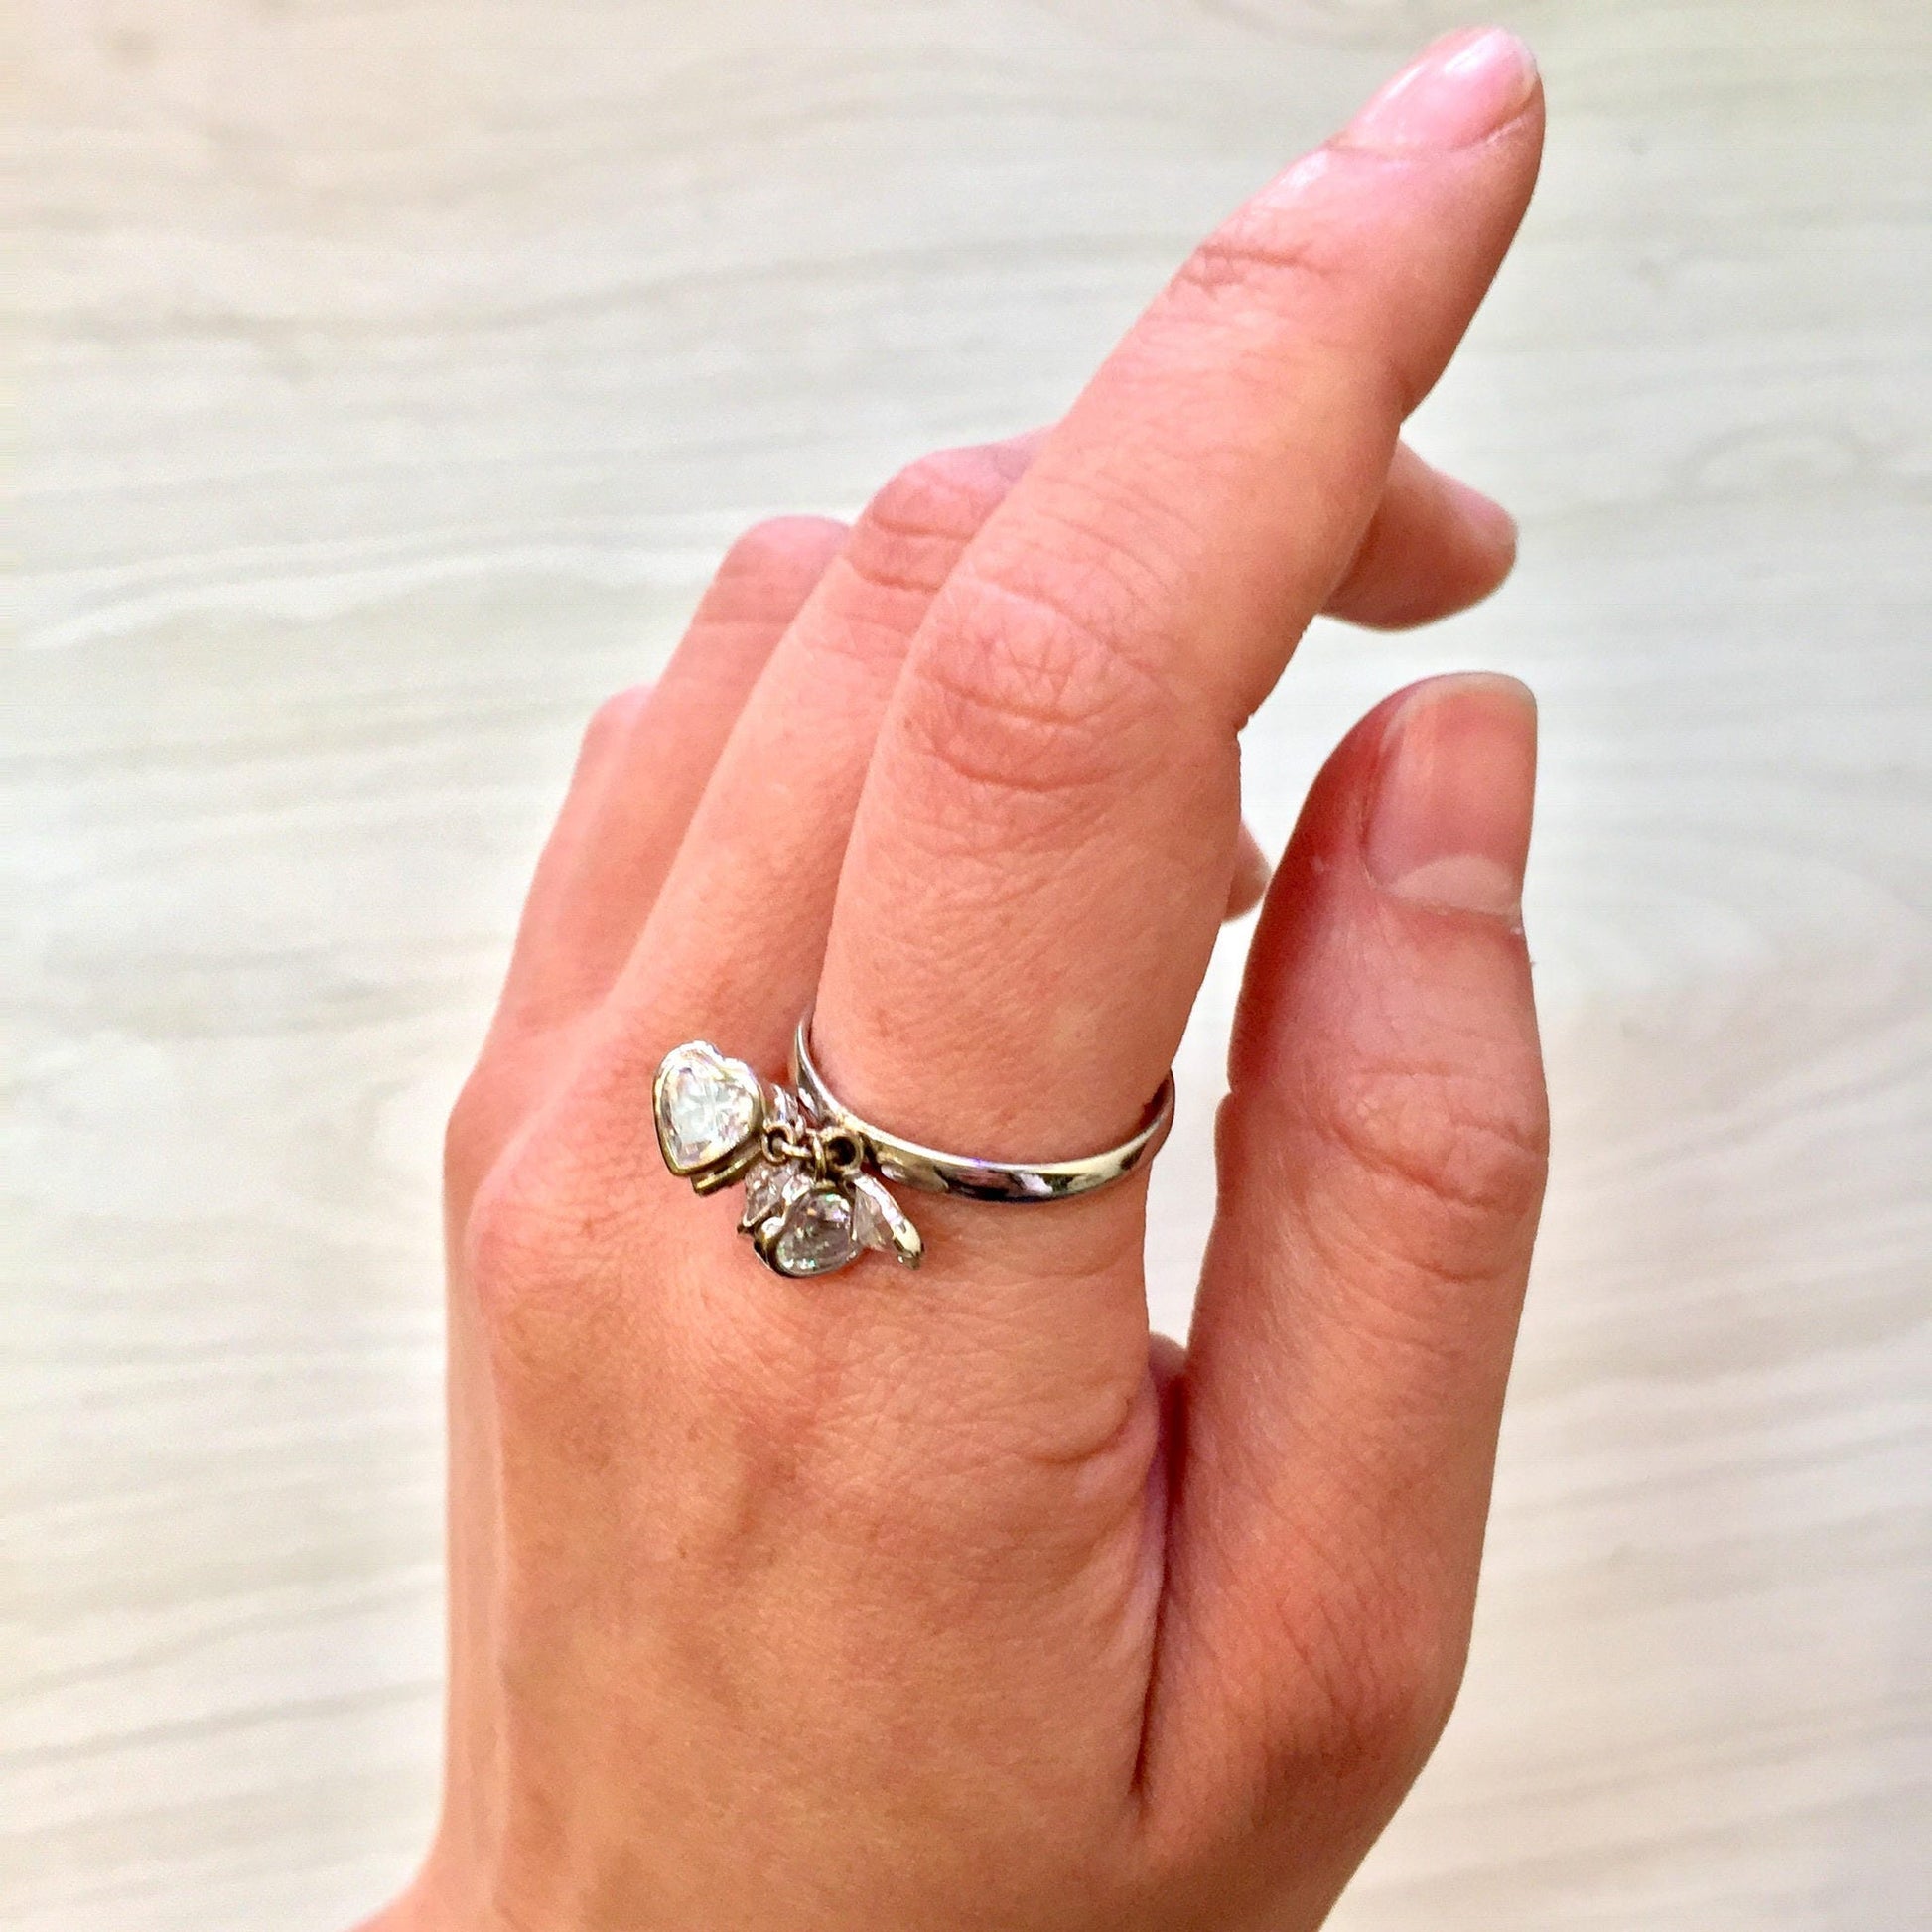 14K white gold heart-shaped ring with cubic zirconia stones on a person's hand, showing the ring from various angles against a light background.